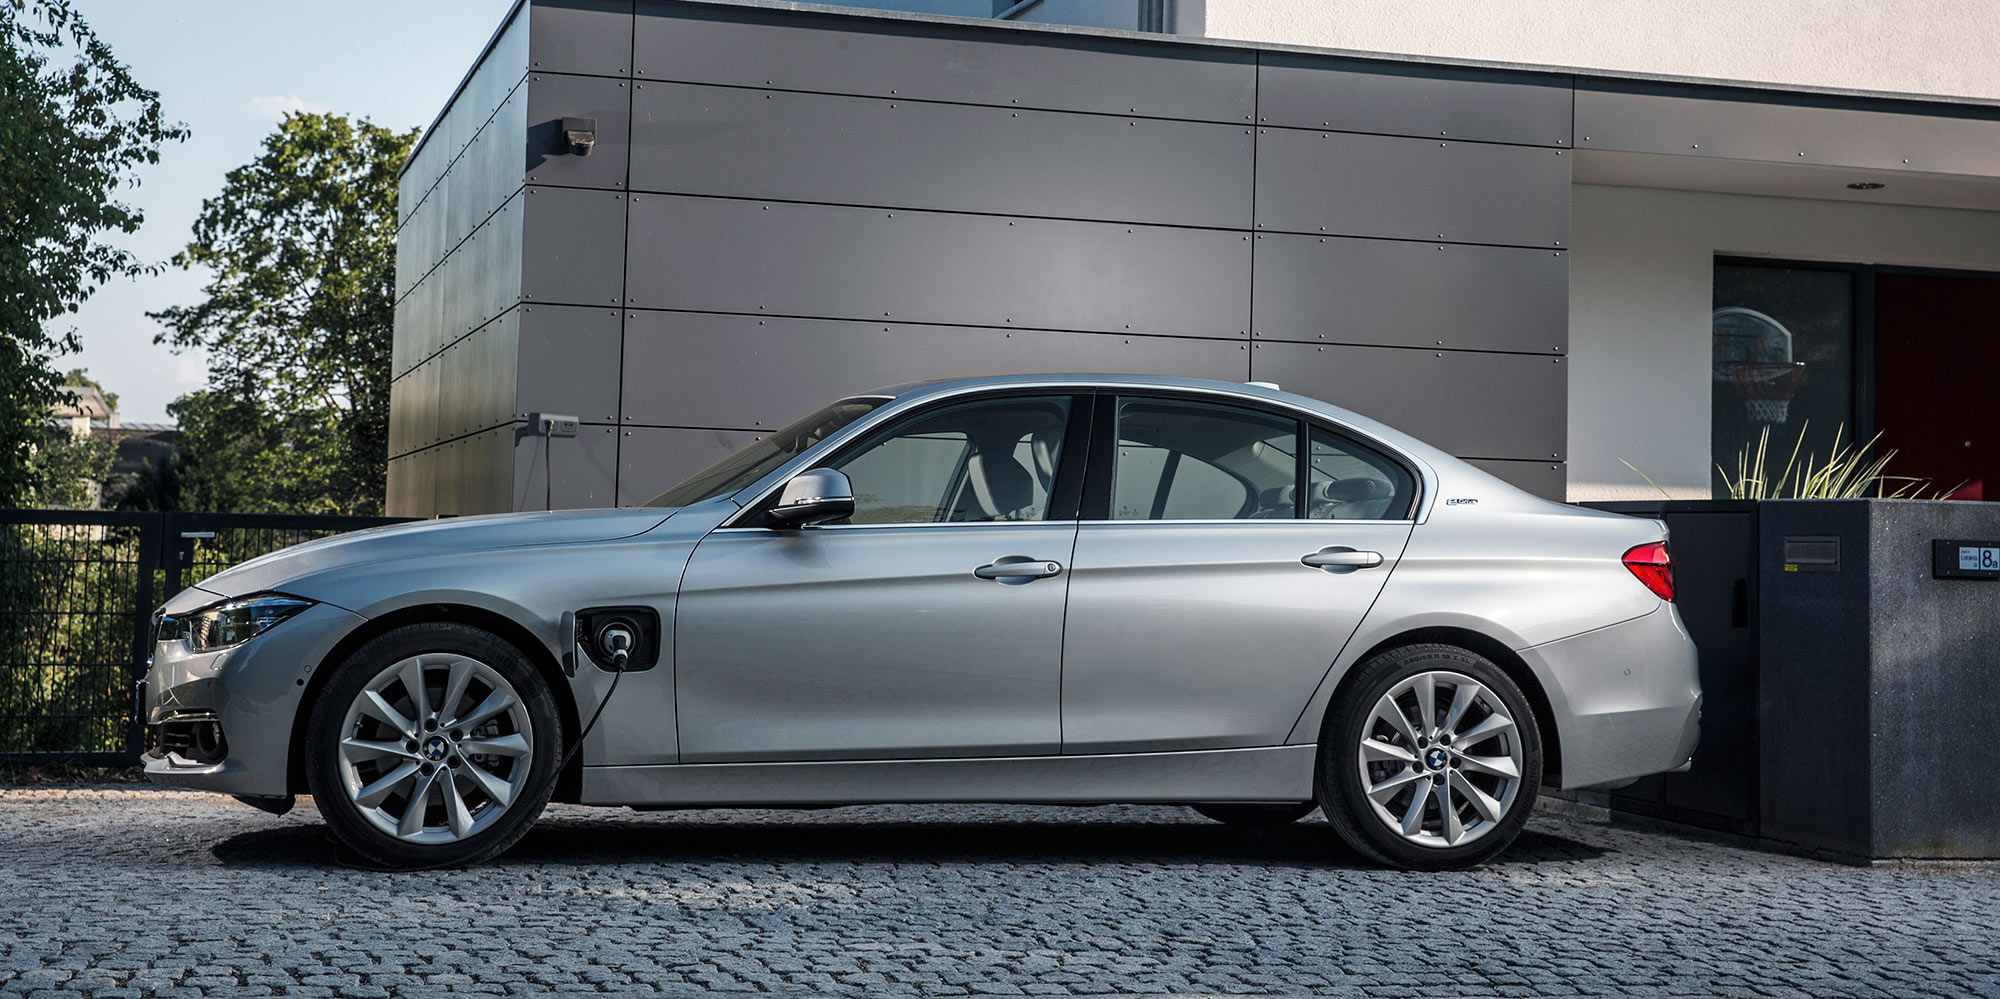 The current plug-in 3-Series but a pure EV is in the works